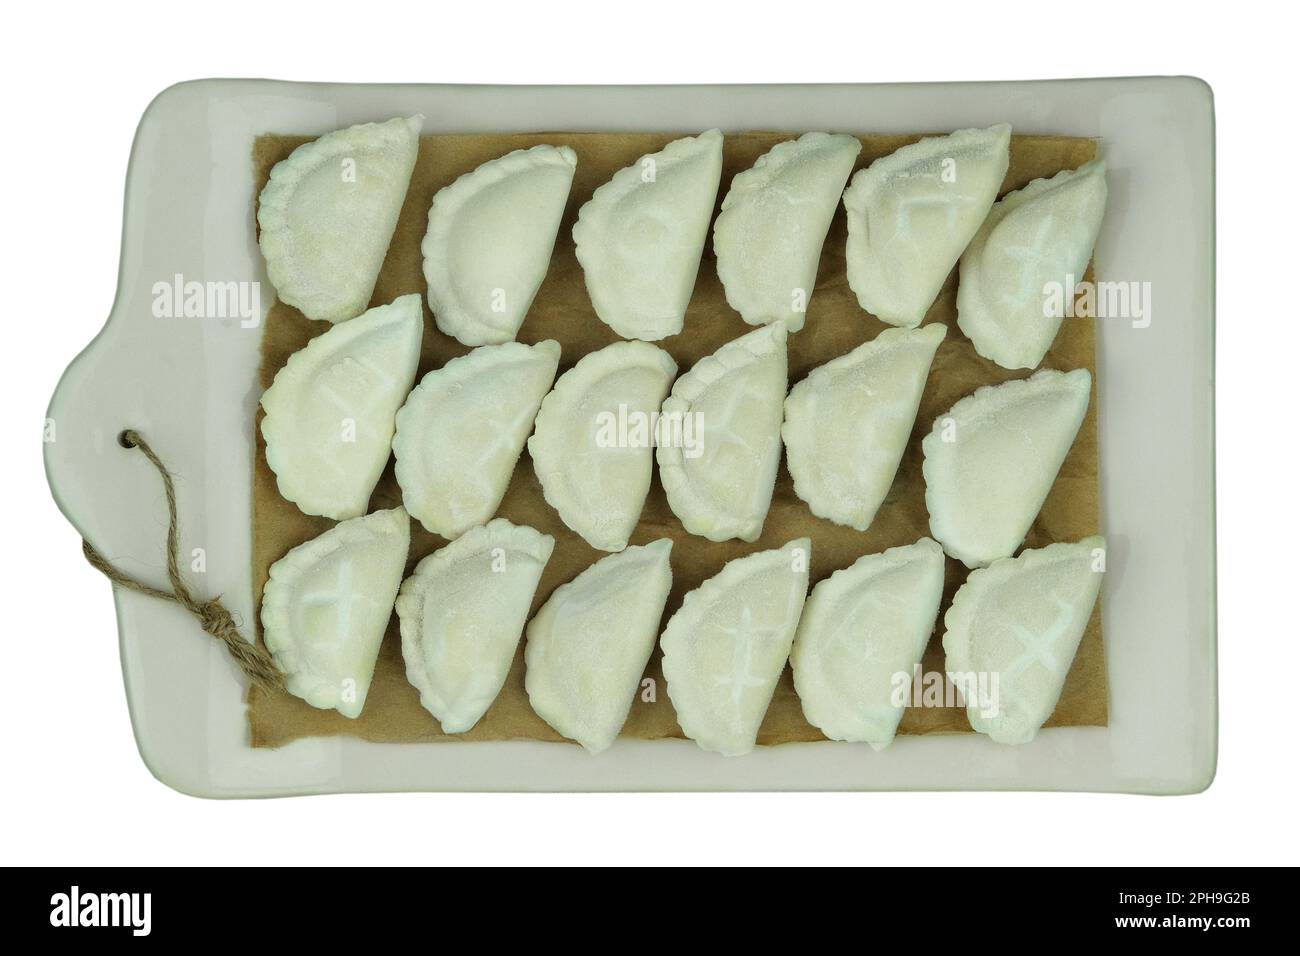 Dumplings with potatoes on the kitchen board. Dumplings with potatoes is a traditional Ukrainian dish. Home cooking. Stock Photo